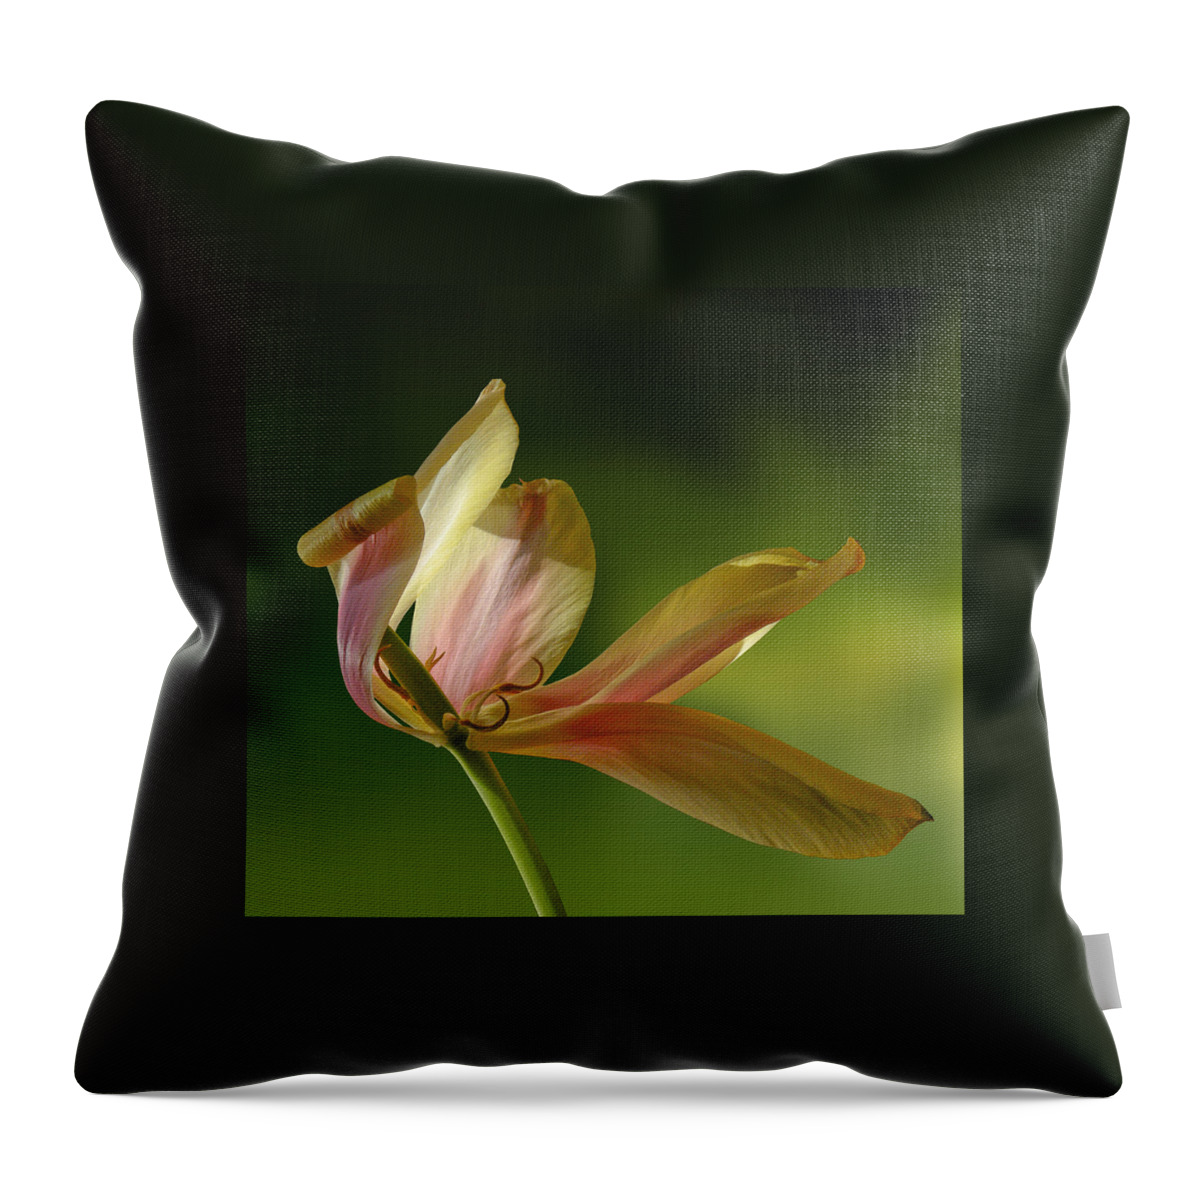 Flower Throw Pillow featuring the photograph 4188 by Peter Holme III